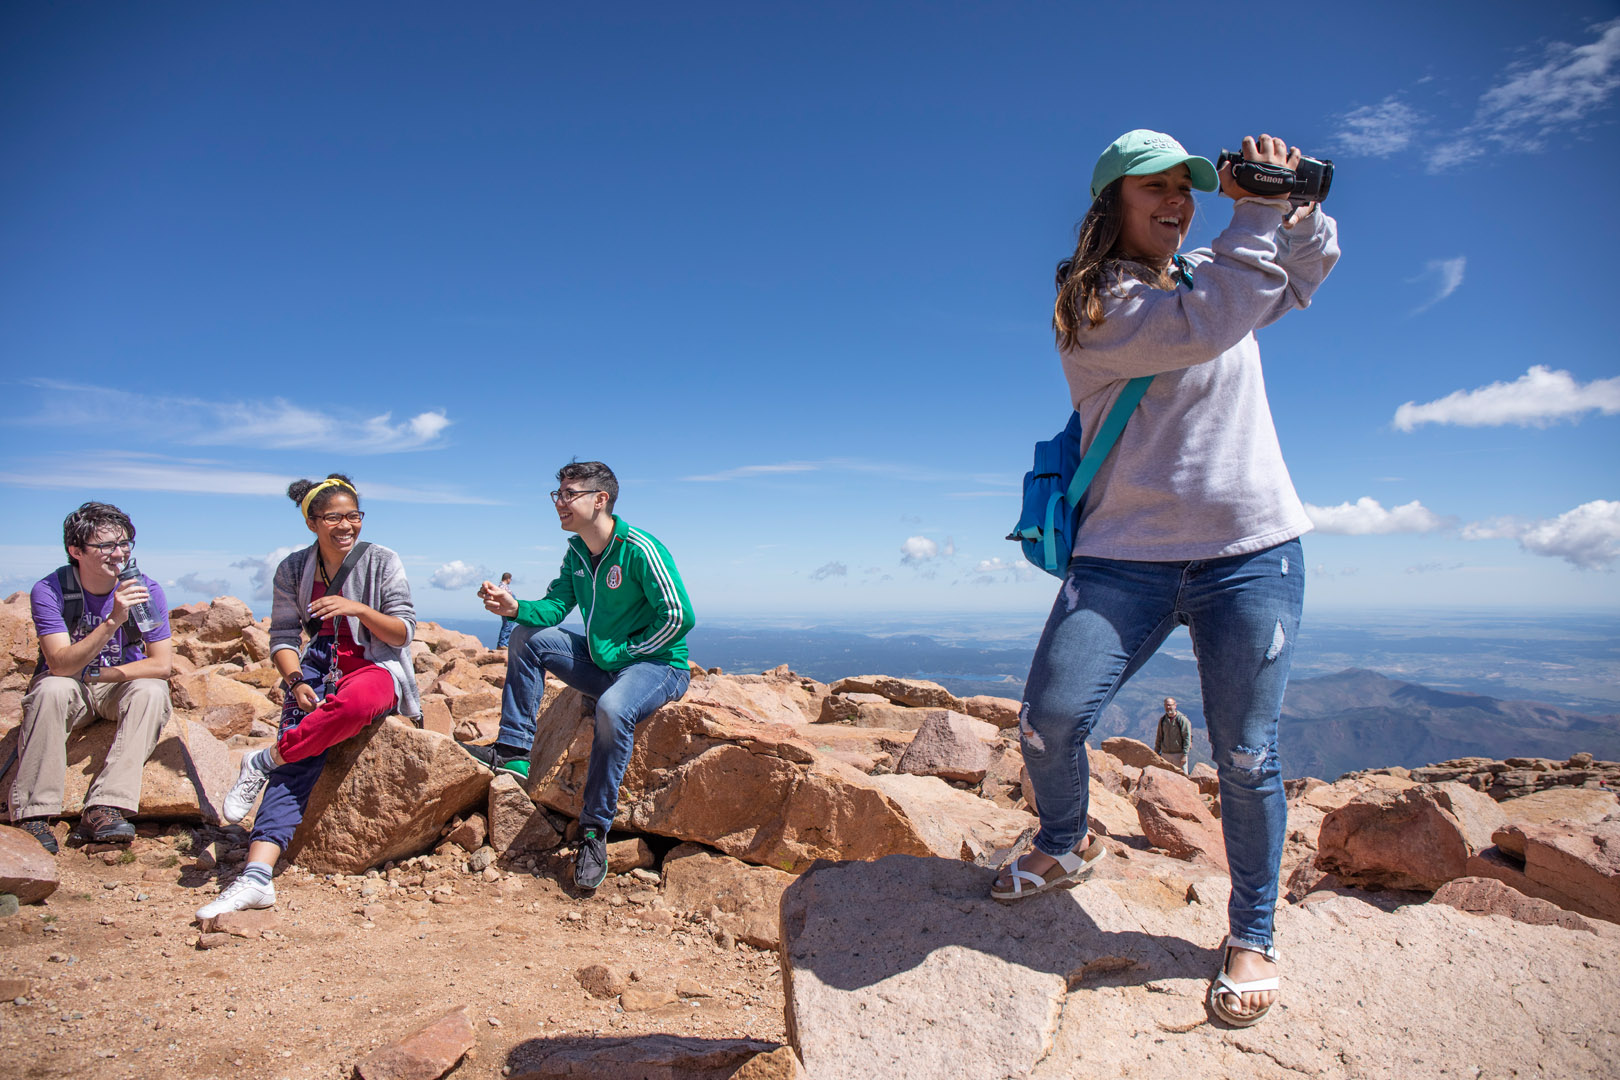 <strong>Maddy Brauninger ’23</strong> films from the summit of Pikes Peak while classmates <strong>Ian Widmann ’23</strong>, <strong>Kiara Butts ’23</strong> and <strong>Danny Zamudio ’21</strong> discuss access to the outdoors and their Pikes Peak experience. Photo Jennifer Coombes